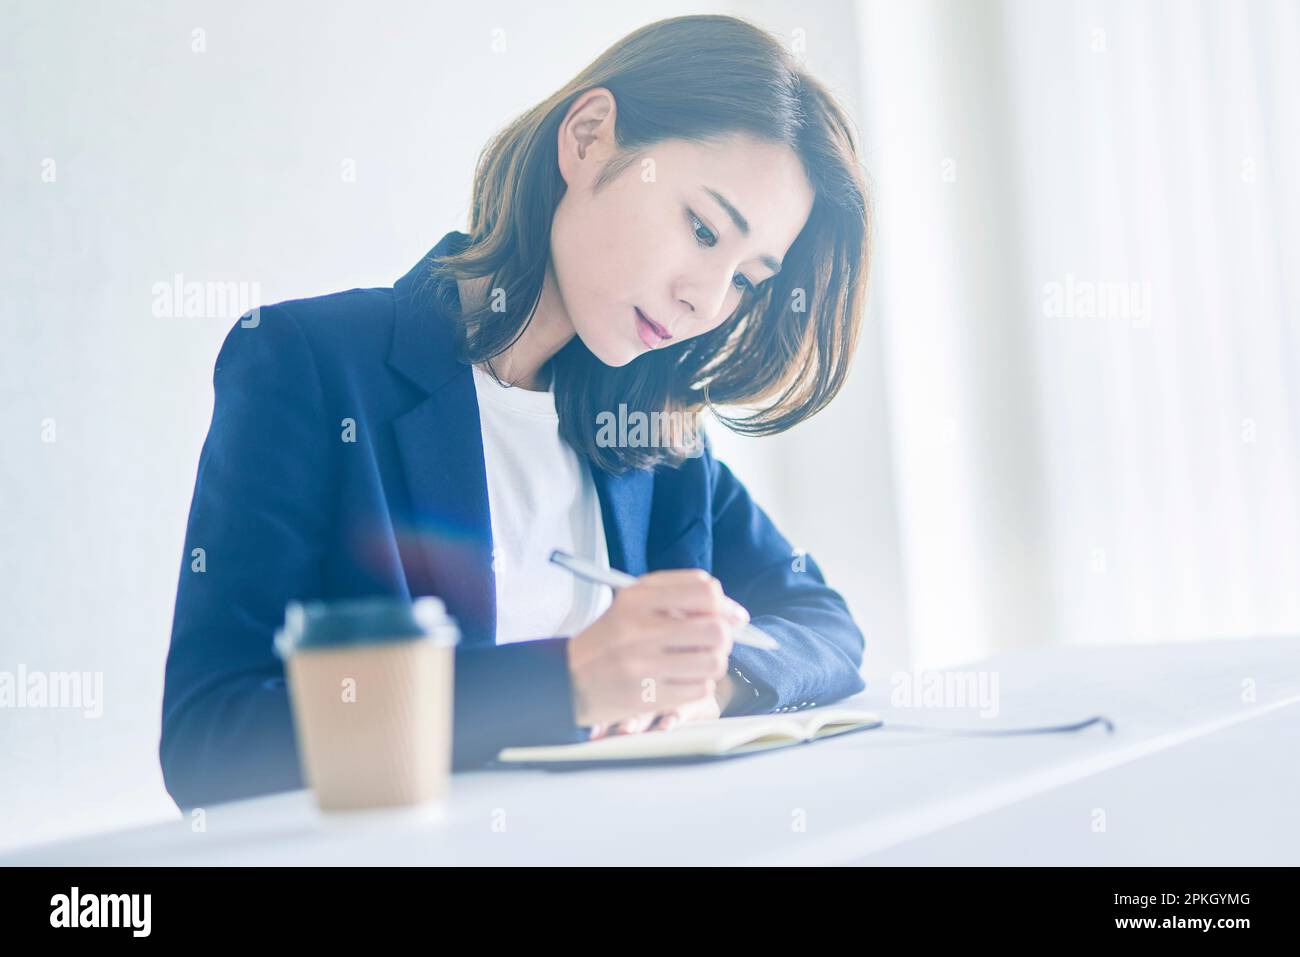 Woman taking notes seriously Stock Photo